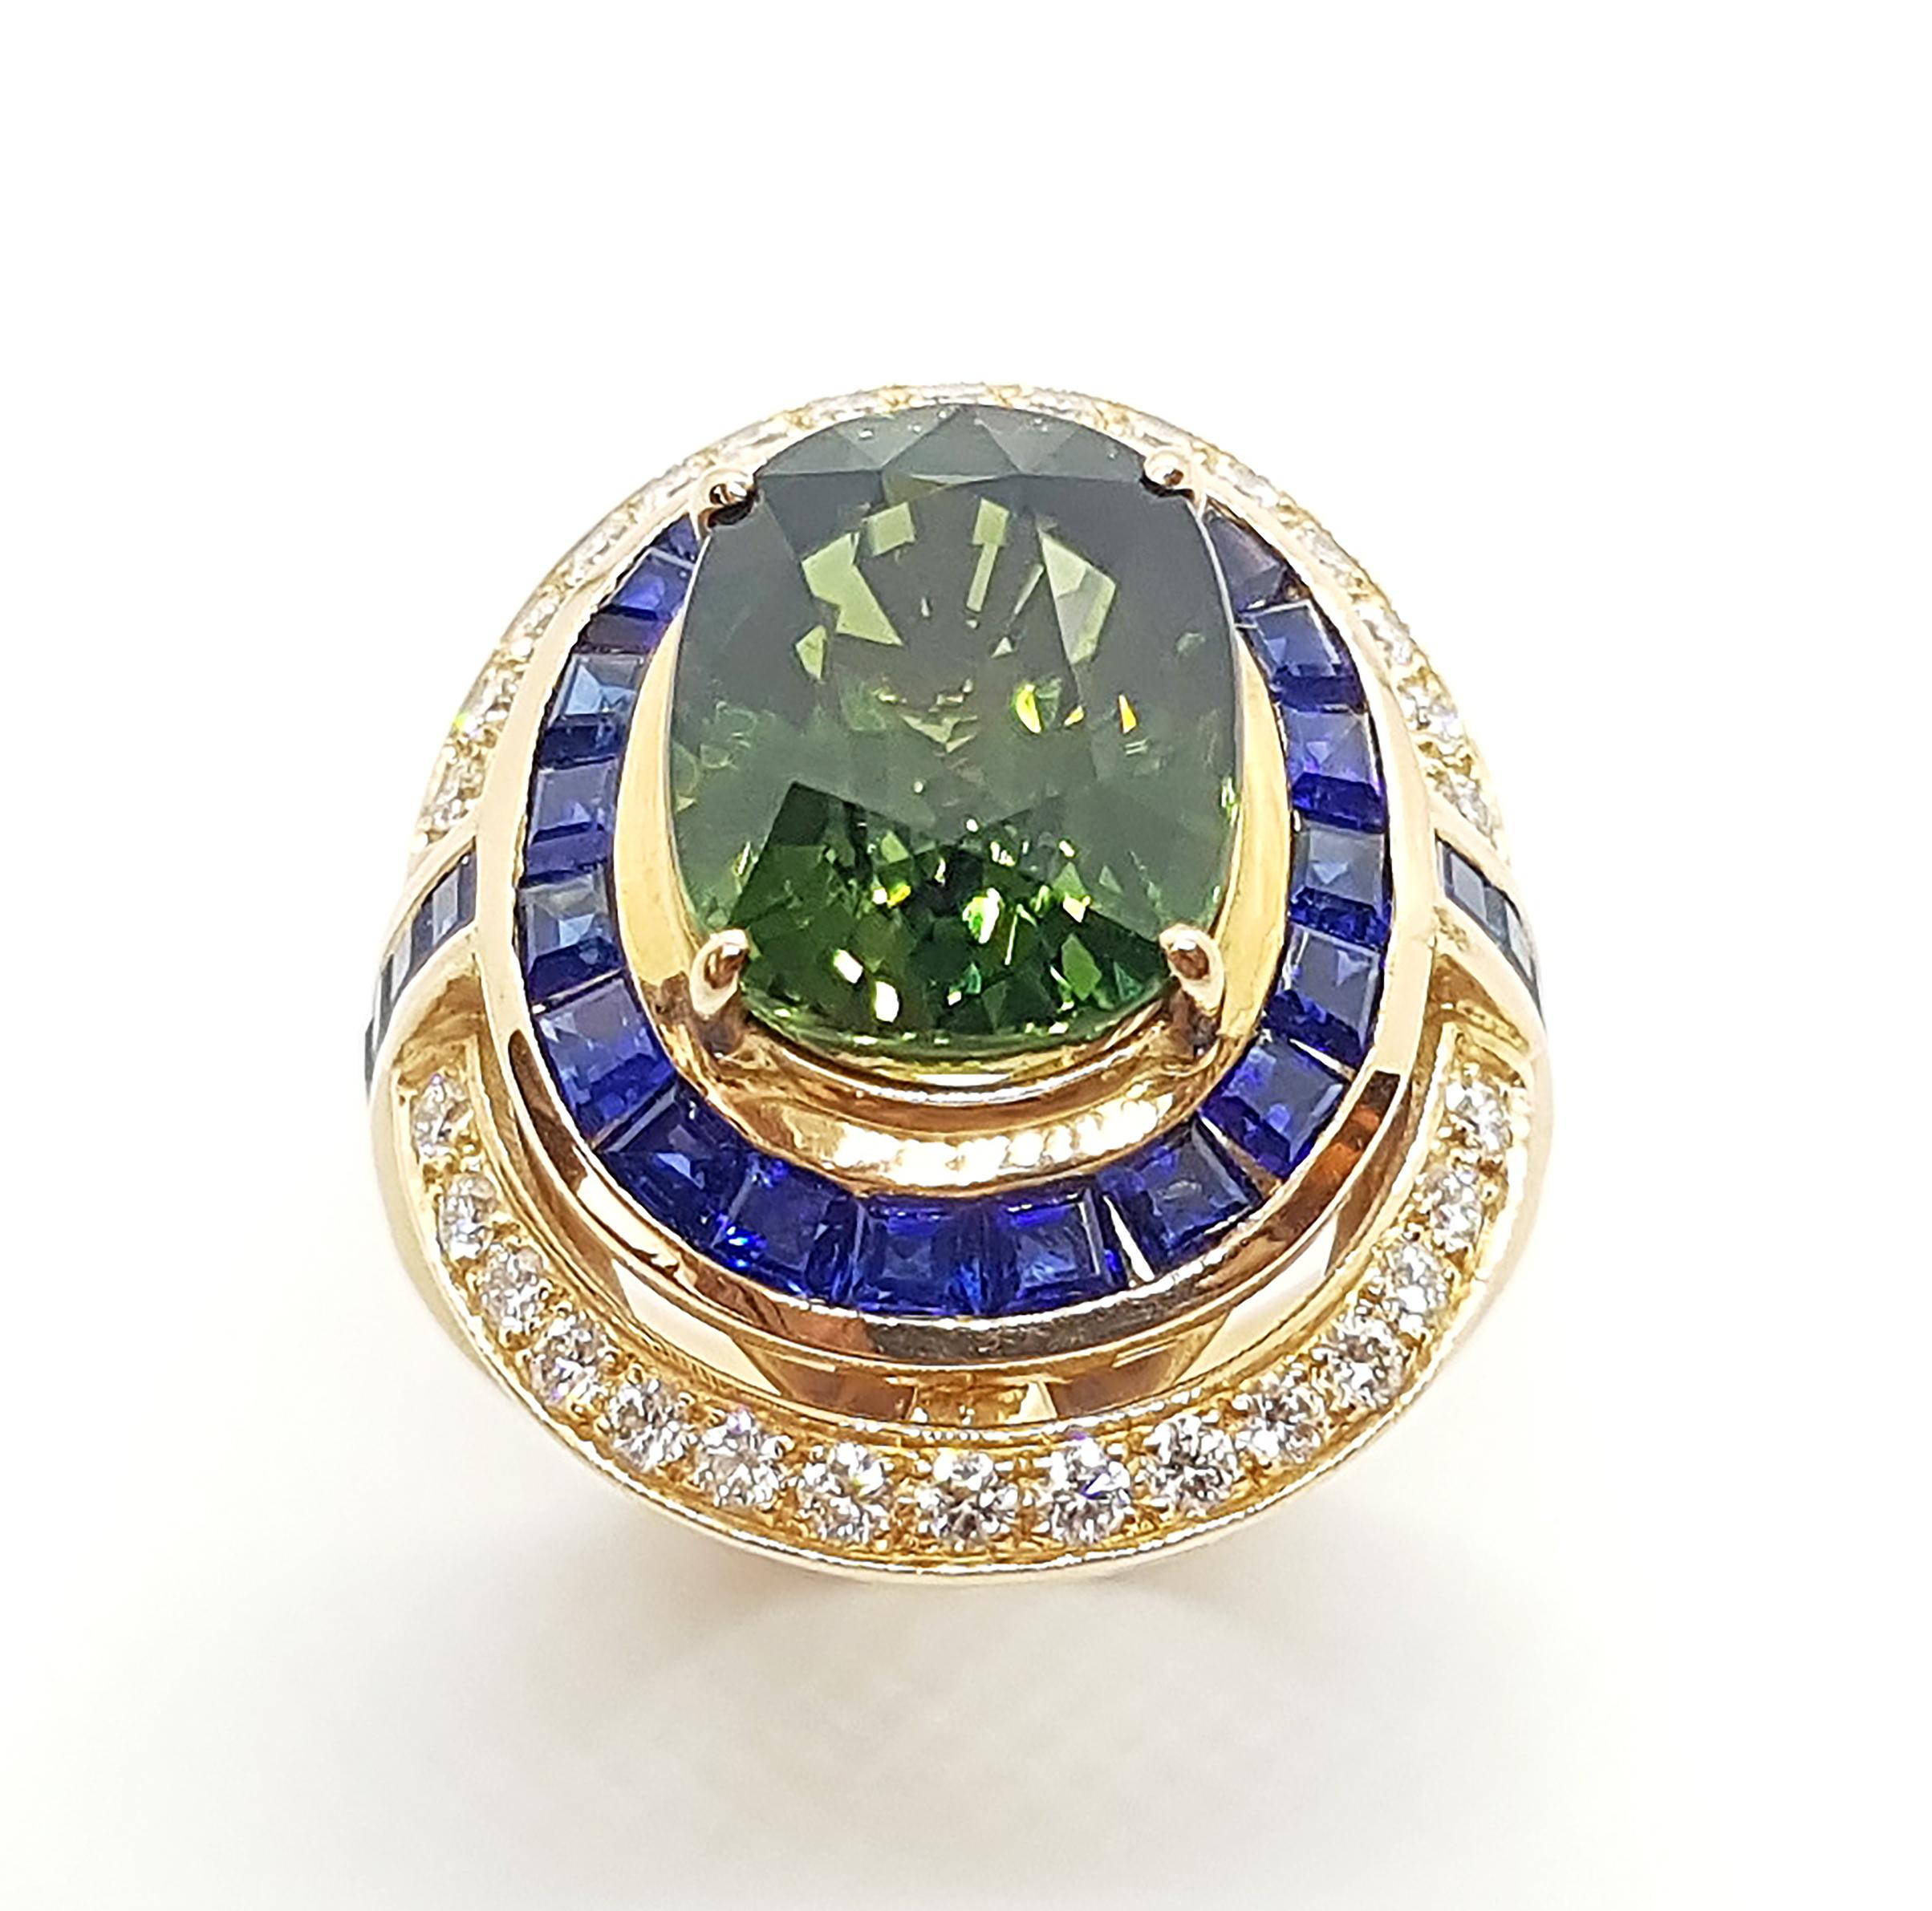 Green Sapphire 10.23 carats with Blue Sapphire 3.34 carats and Diamond 0.59 carat Ring set in 18 Karat Rose Gold Settings

Width:  1.9 cm 
Length:  2.6 cm
Ring Size: 54
Total Weight: 13.35 grams

Green Sapphire
Width:  1.0 cm 
Length:  1.4 cm

